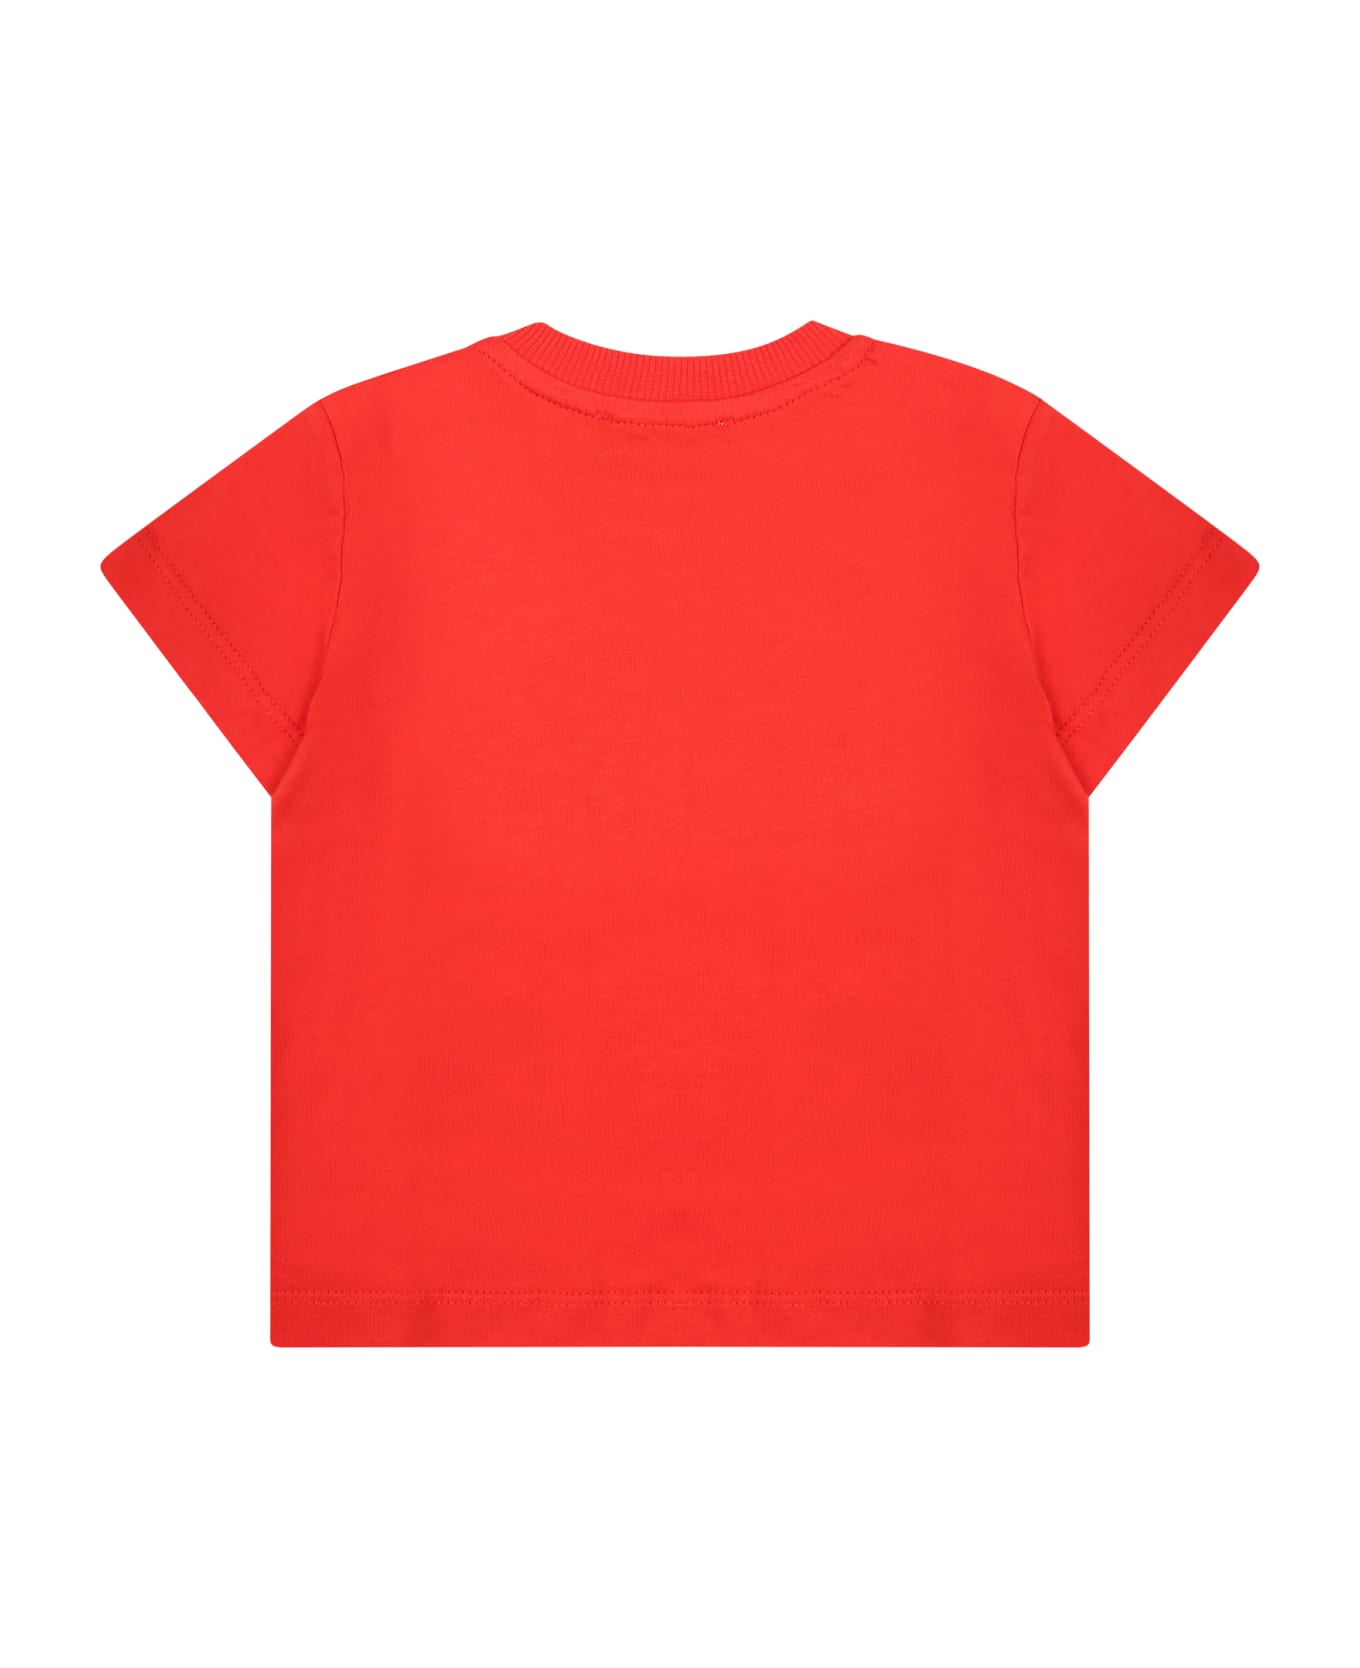 Moschino Red T-shirt For Baby Boy With Teddy Bears - Red